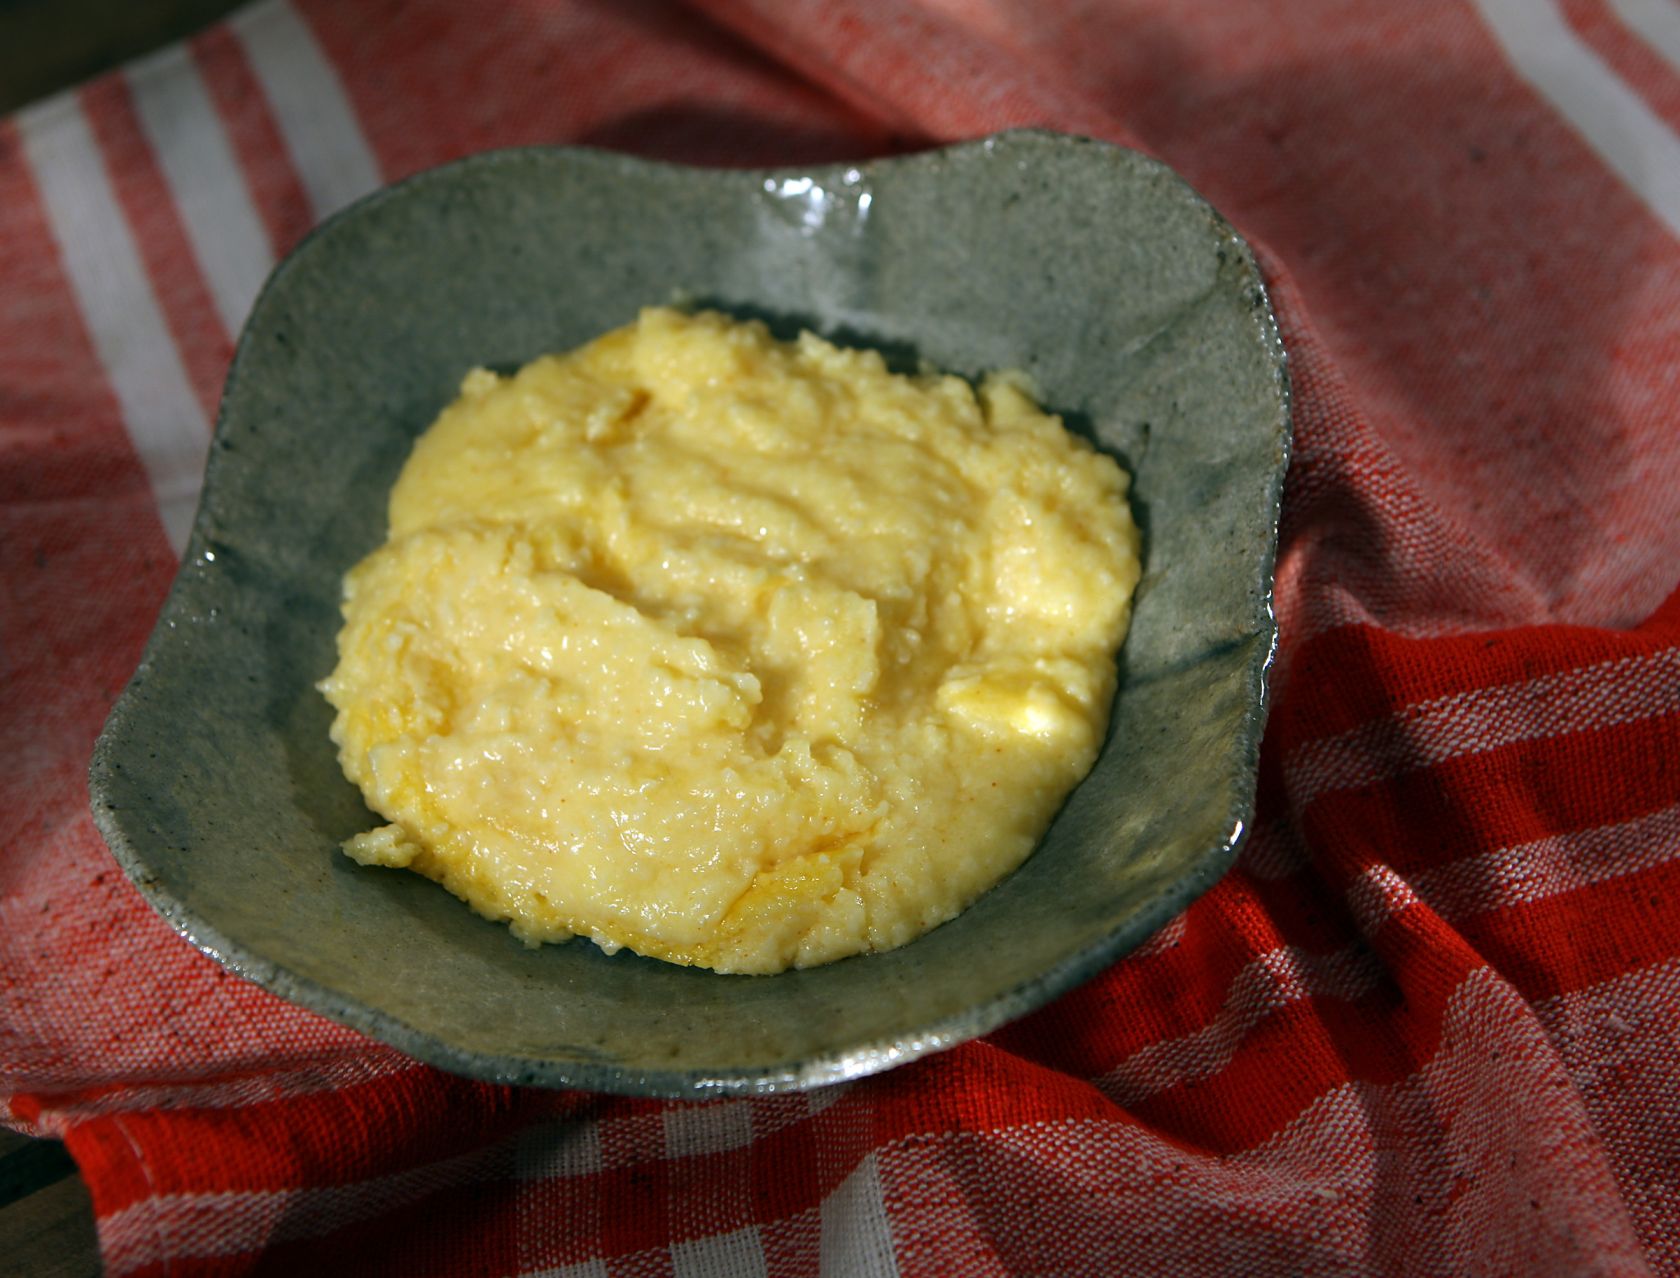 Pioneer Woman: A bowl of cheesey grits.